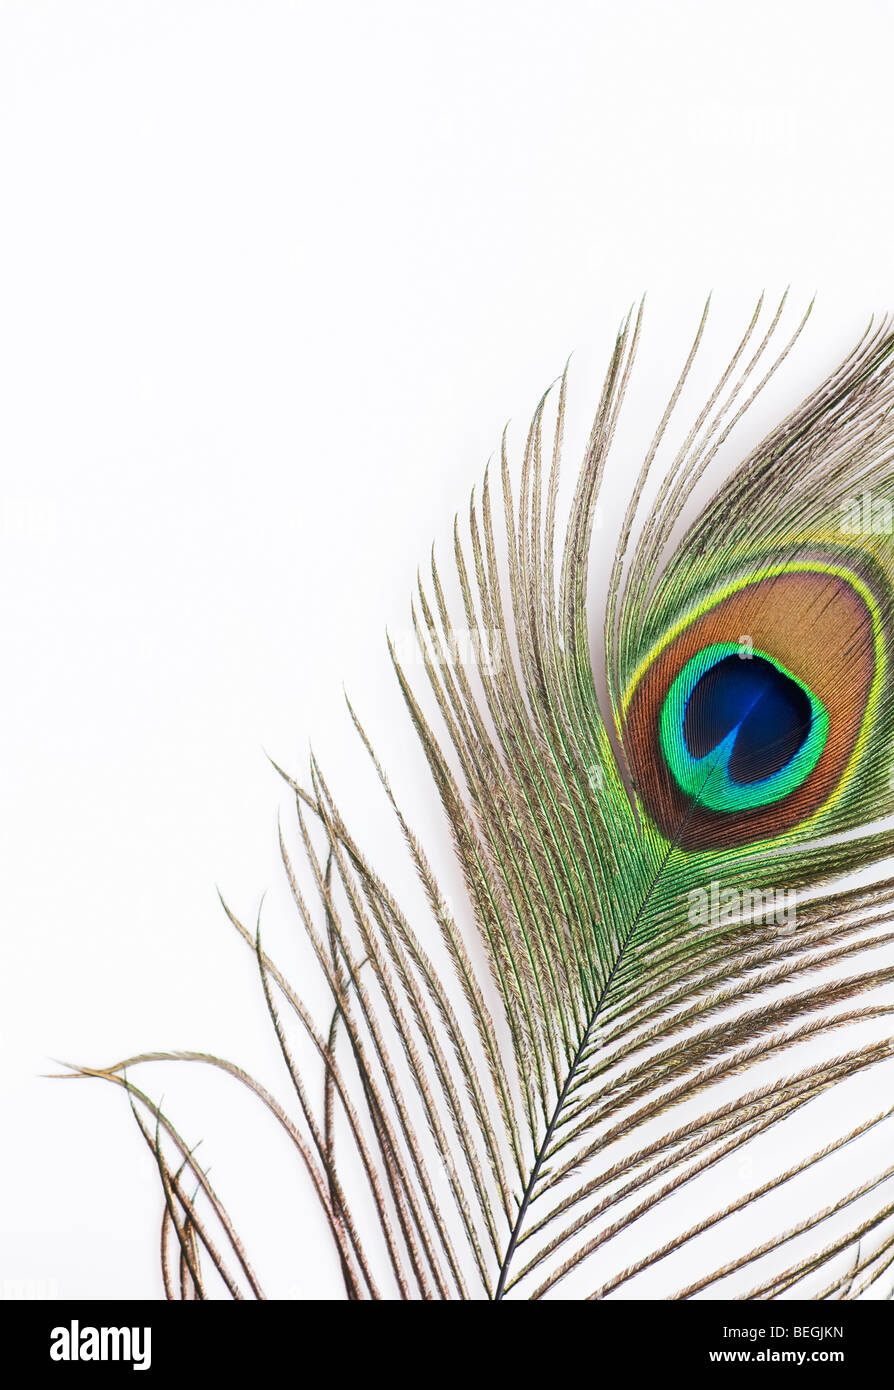 Close up of eye of peacock feather sur fond blanc Banque D'Images